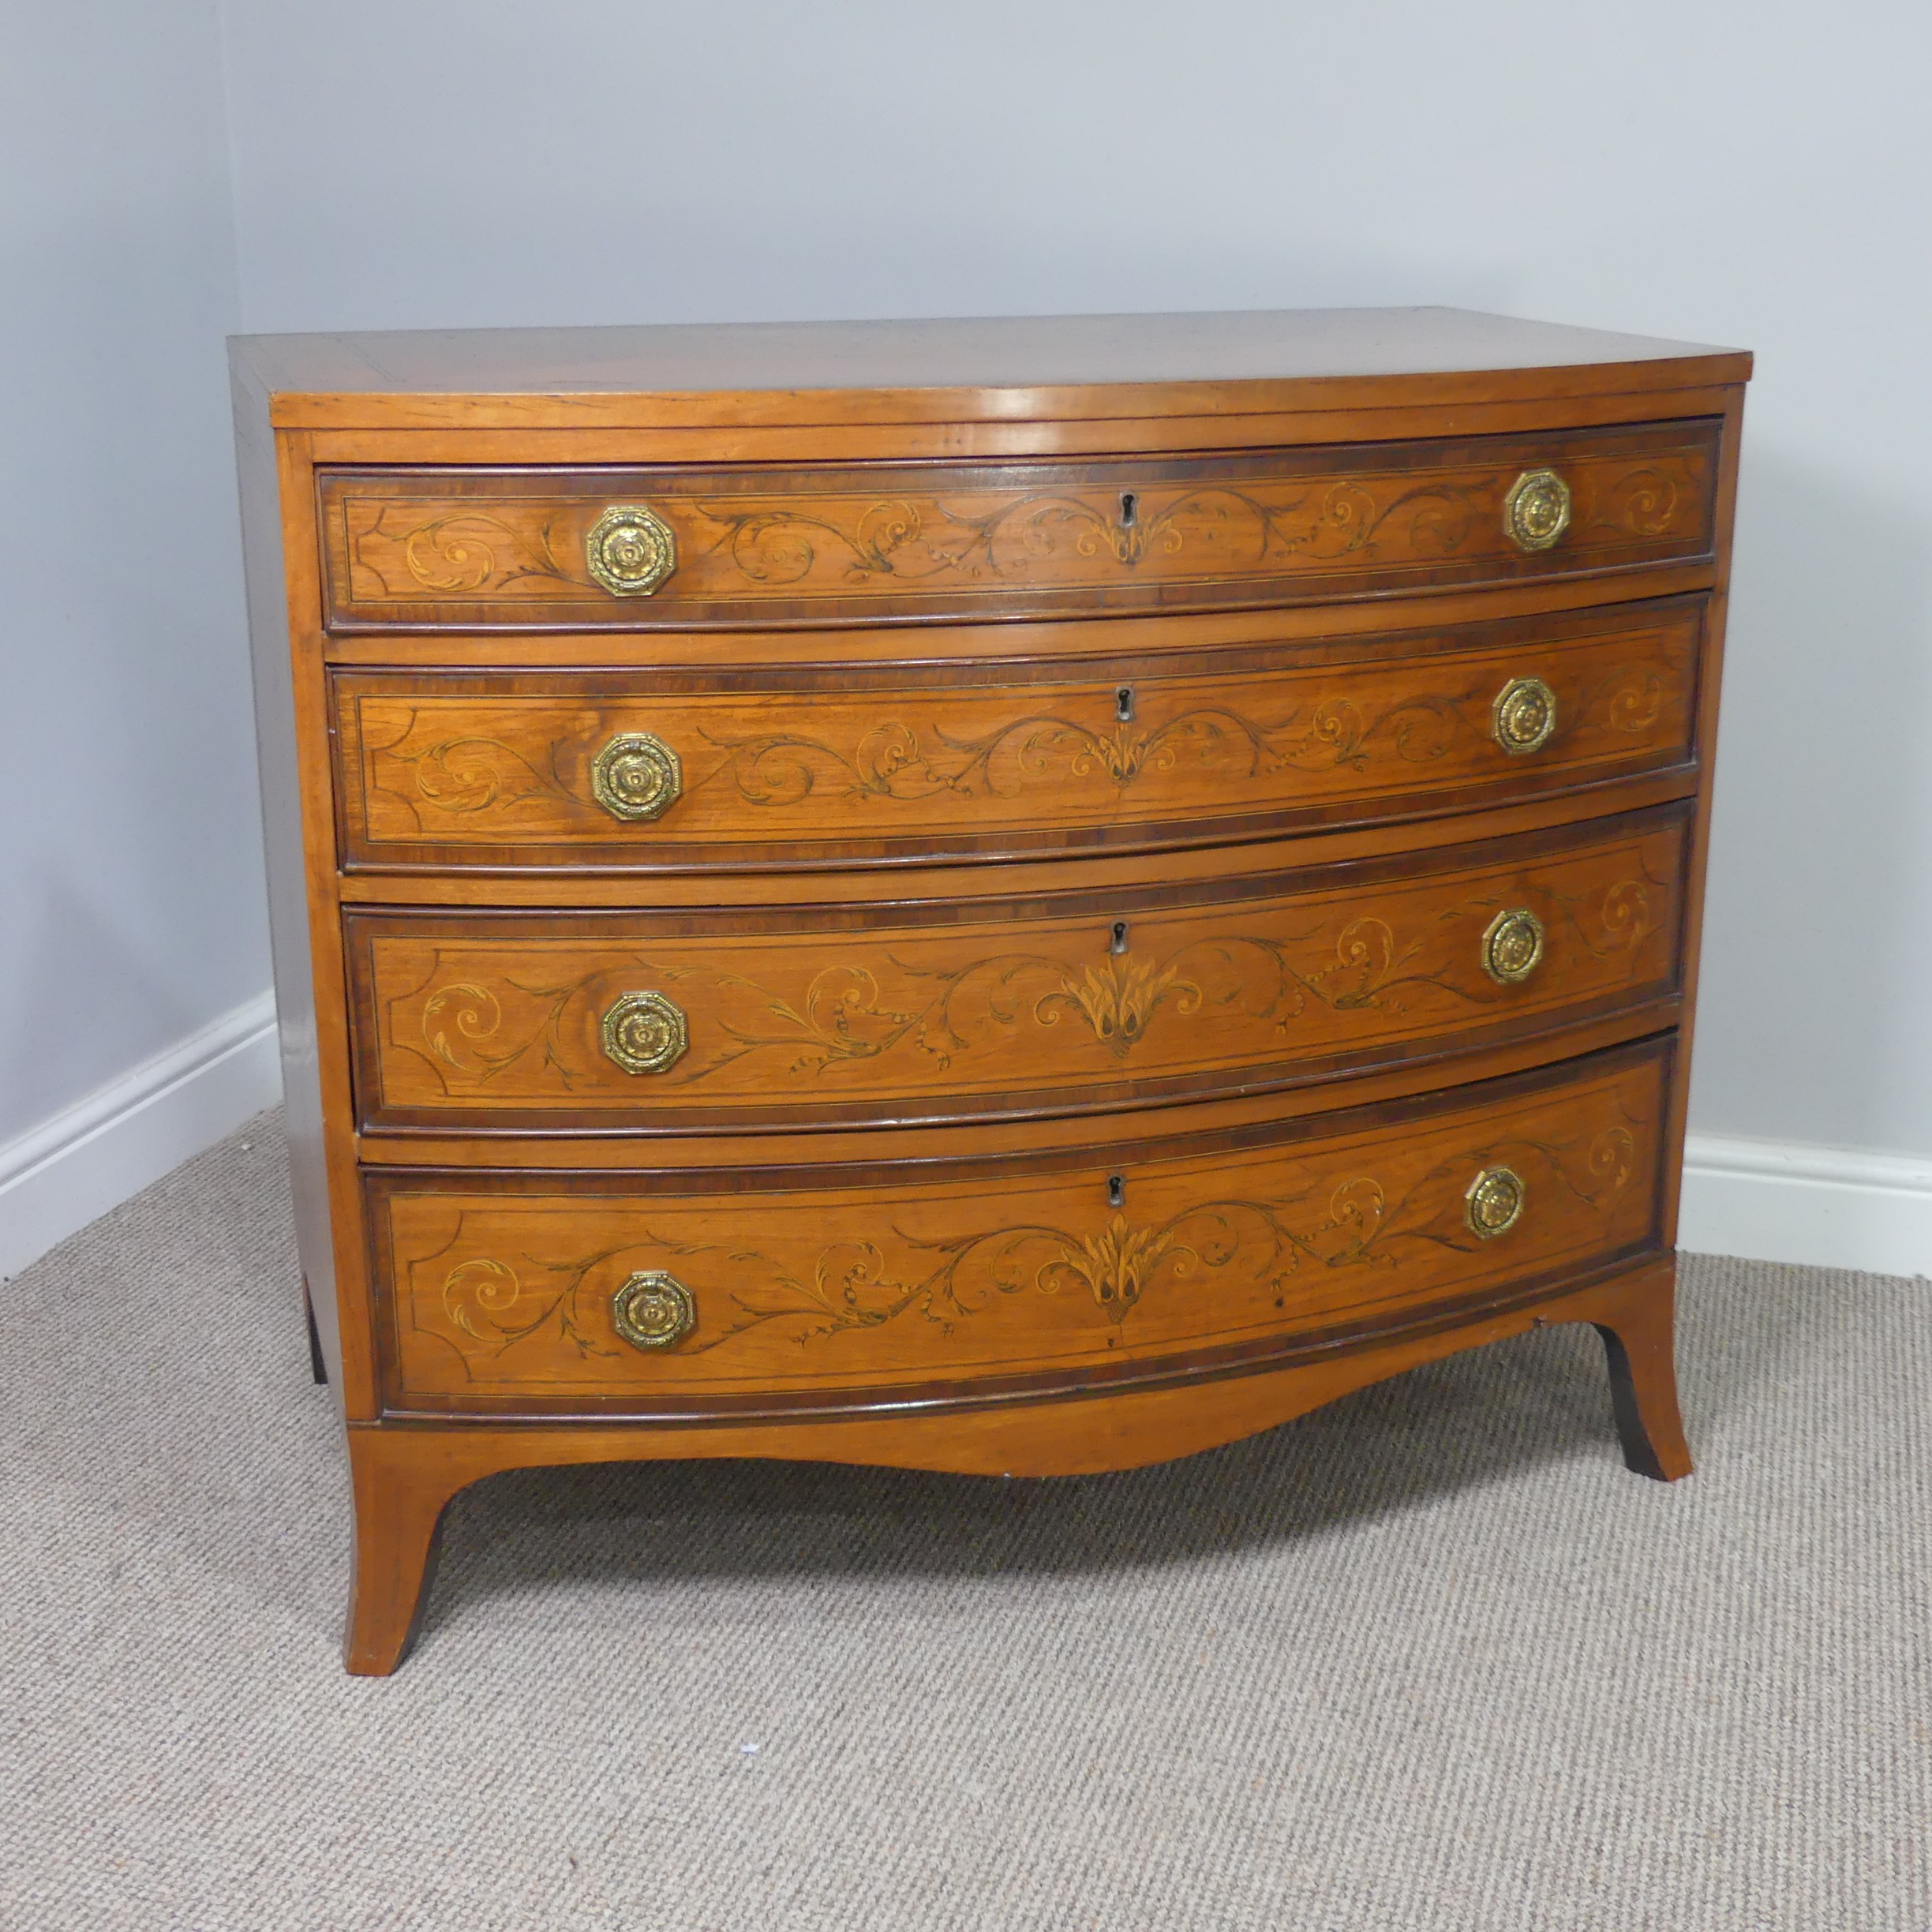 An Edwardian Sheraton Revival inlaid mahogany bow front Chest of Drawers, note damage to one side